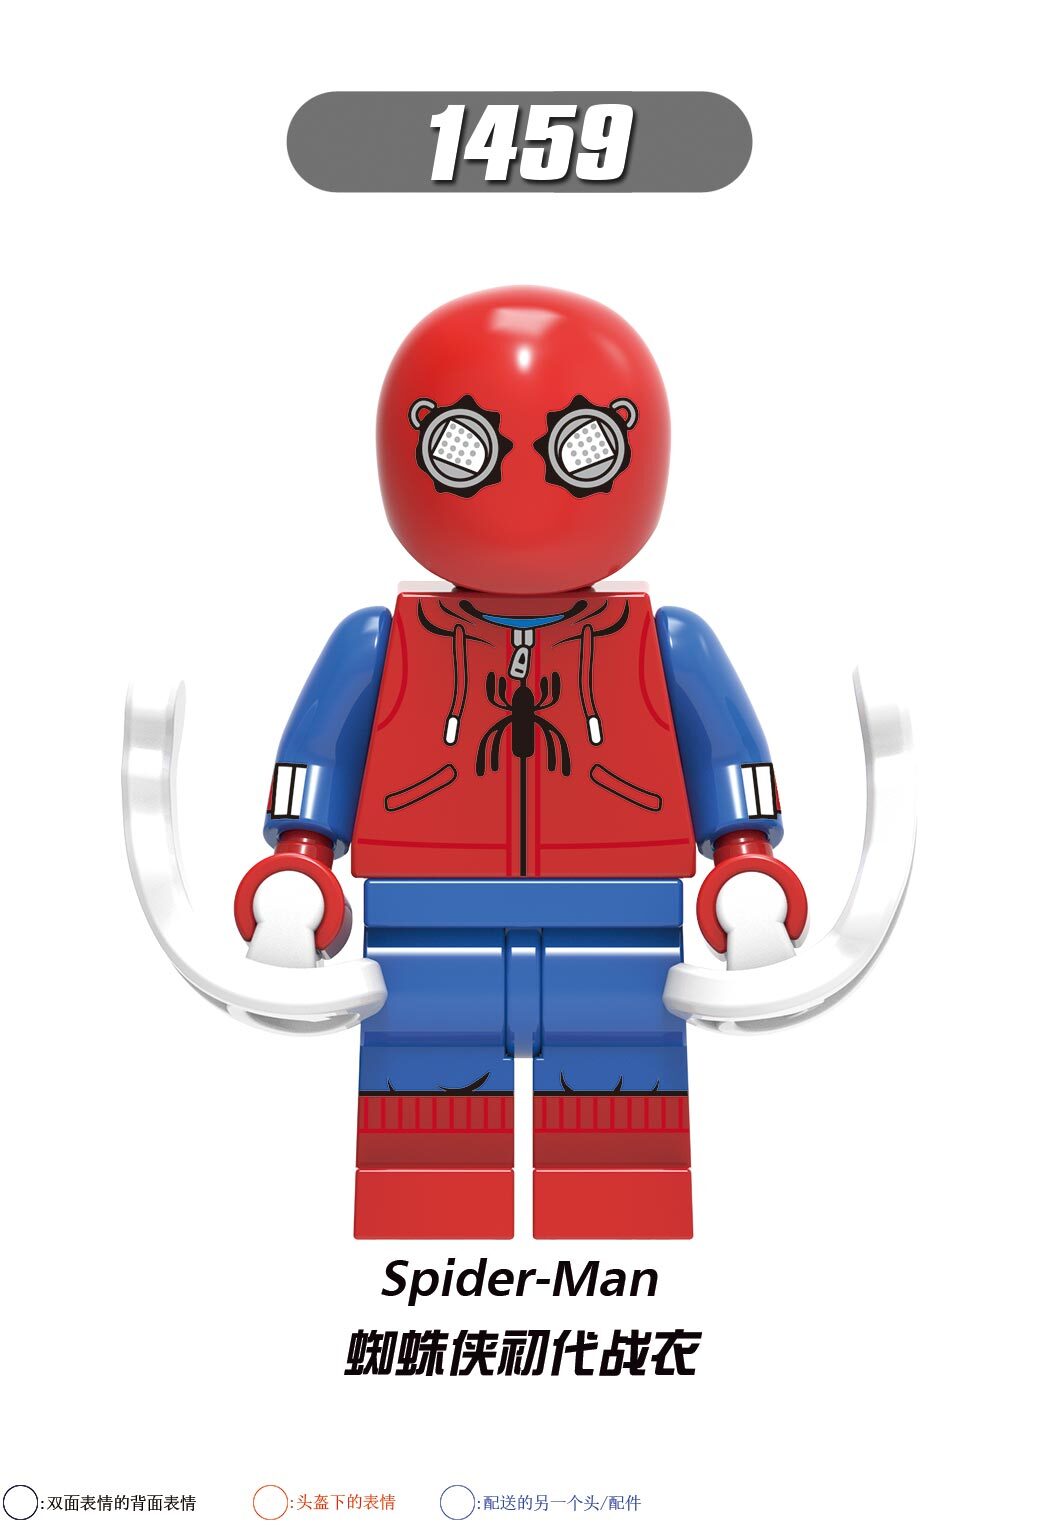 X0281 1454 1455 1456 1457 1458 1459 1460 1461 Super Heroes Spiderman Movie Series Building Blocks Action Figures Educational Toys For Kids Gifts